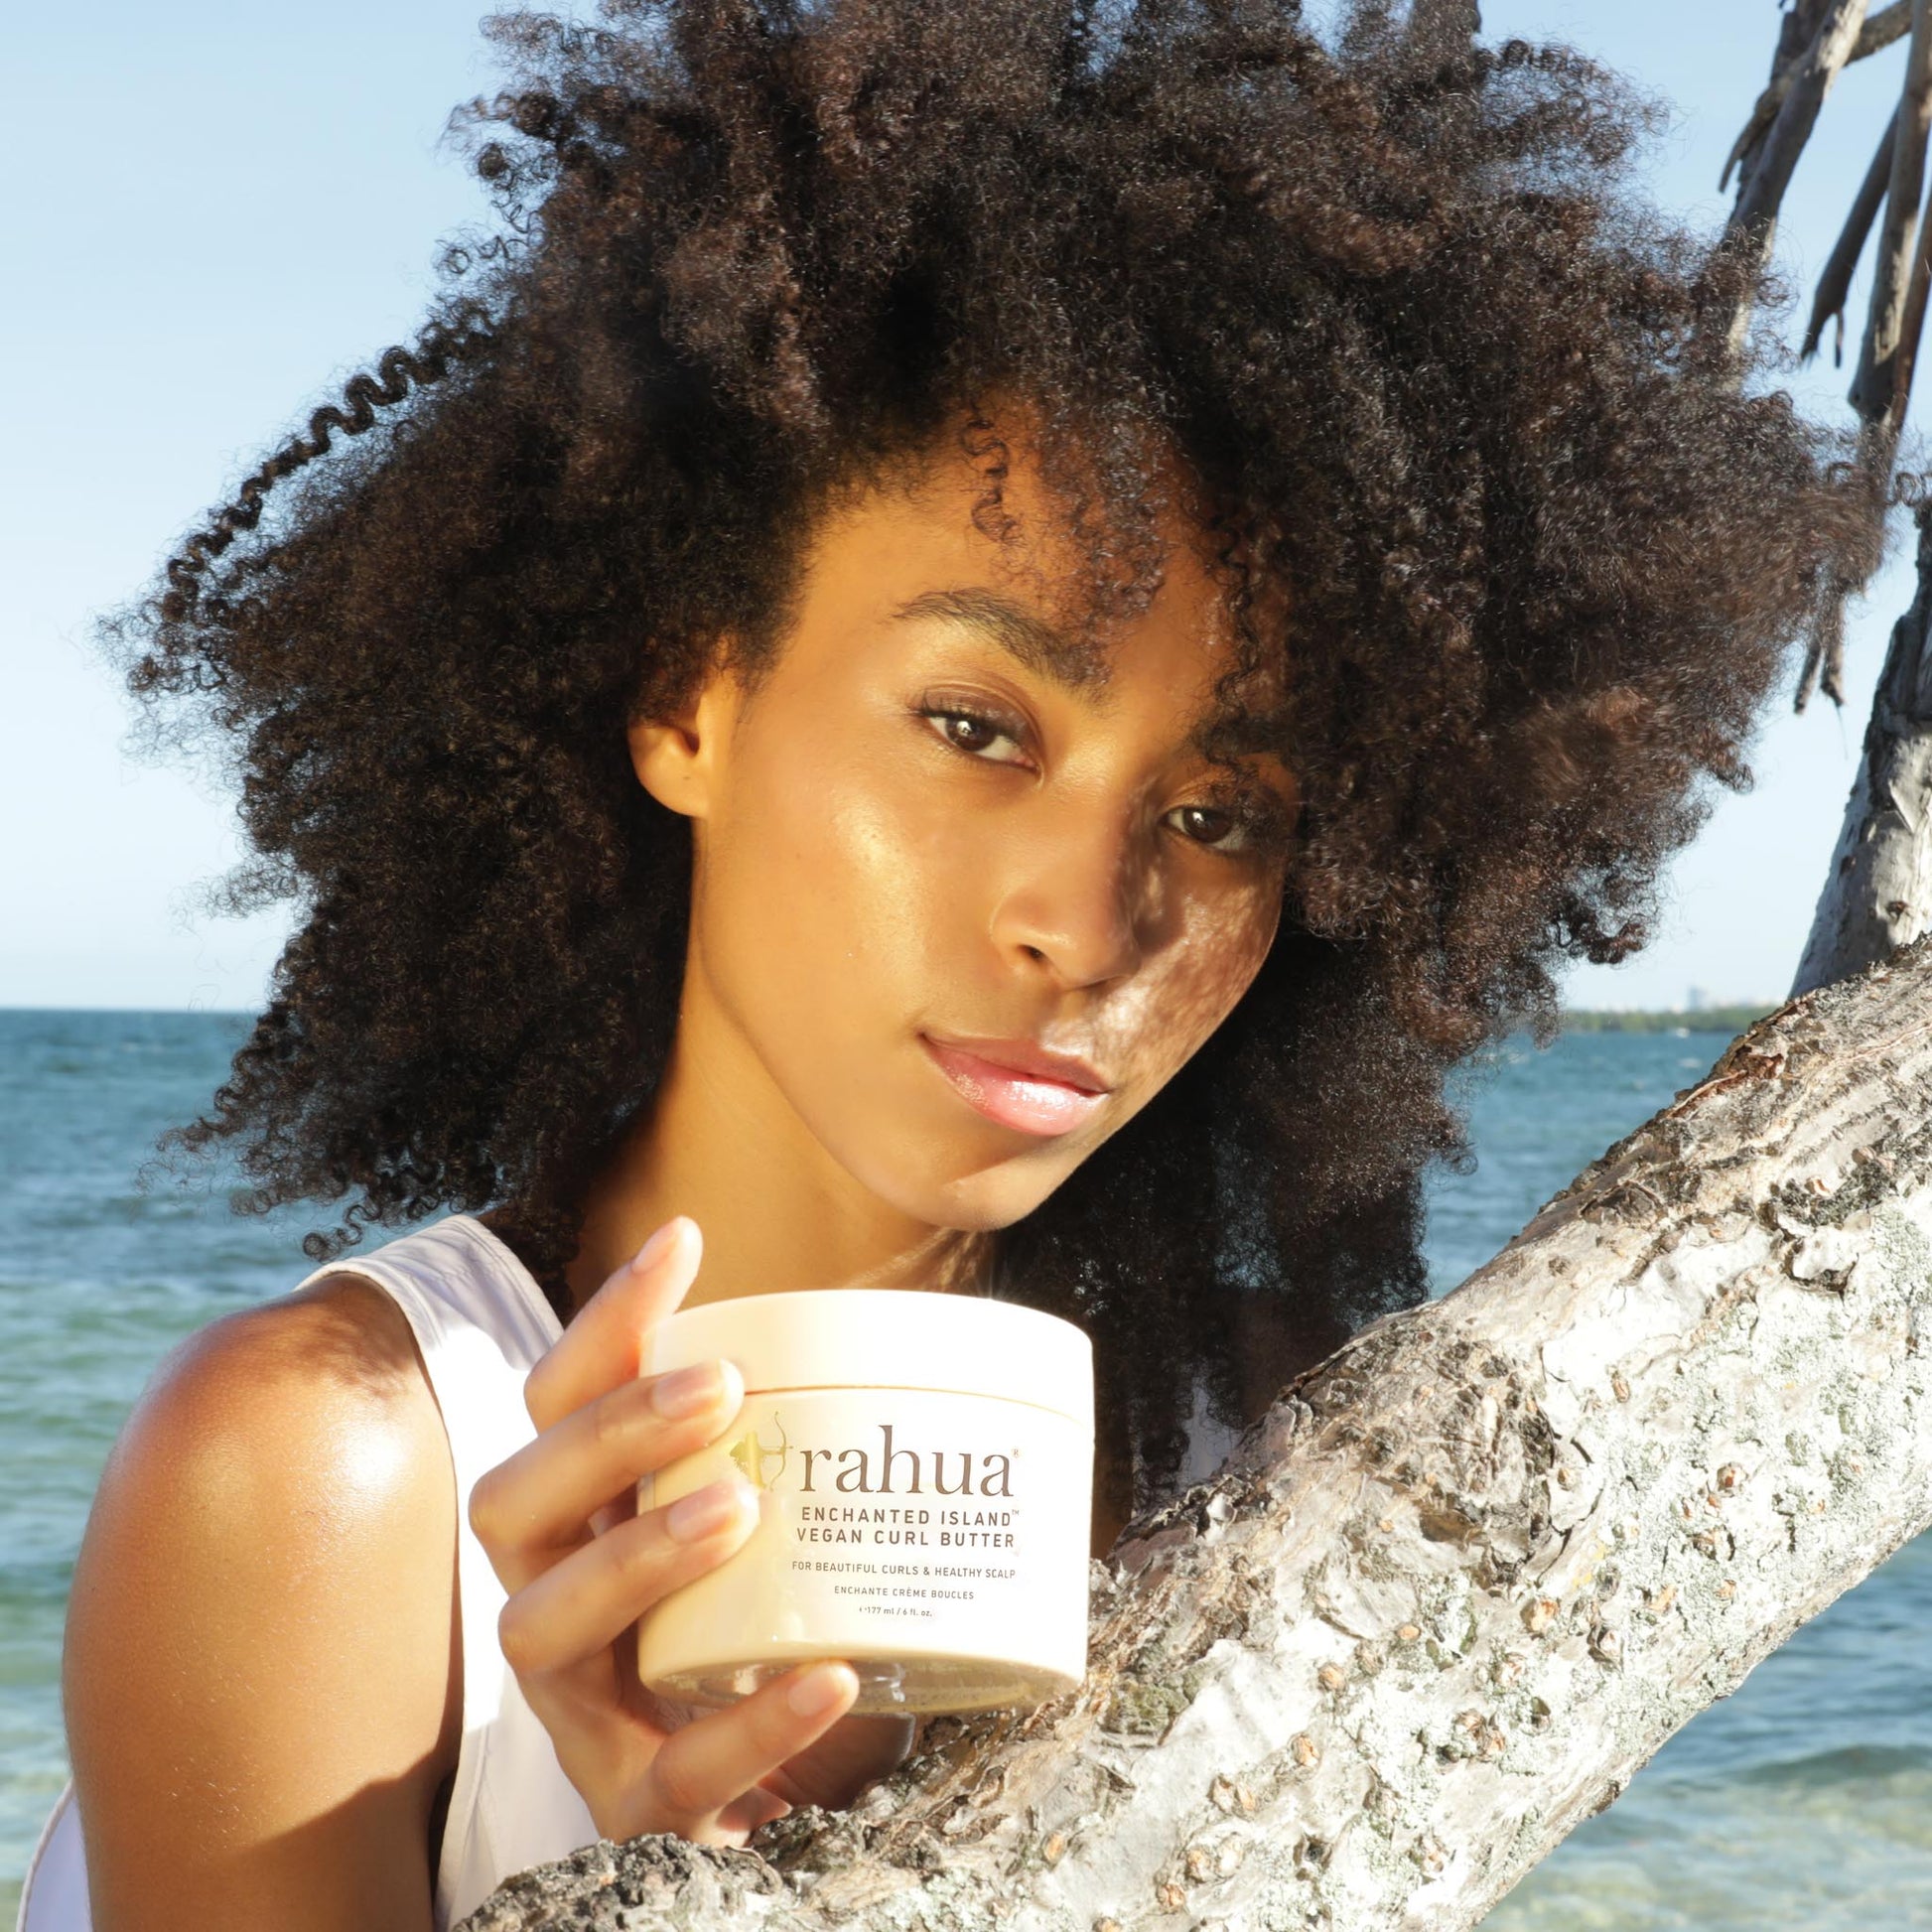 Model with curly hair holding product